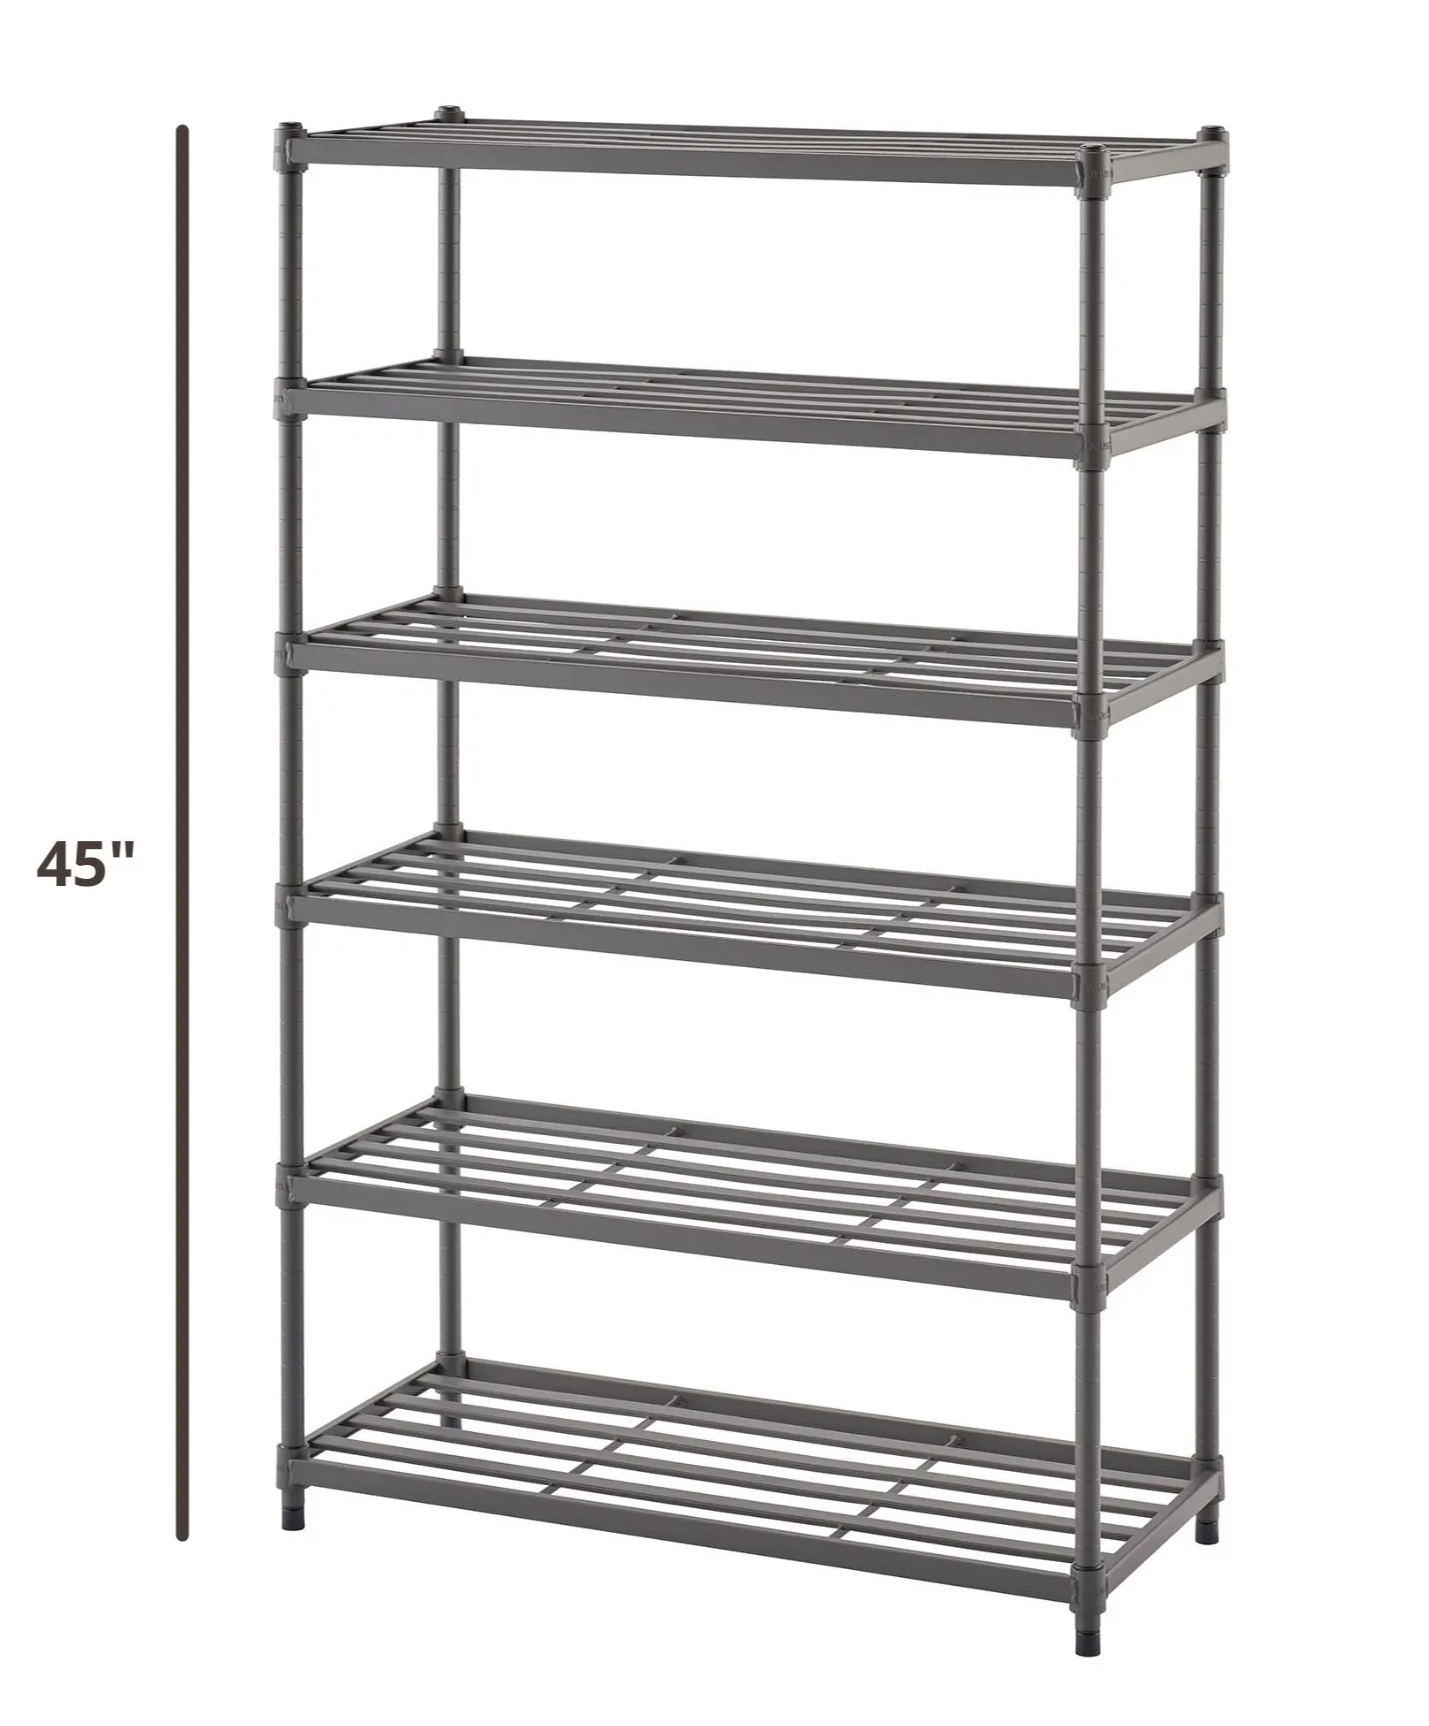 45 inches tall shoe rack